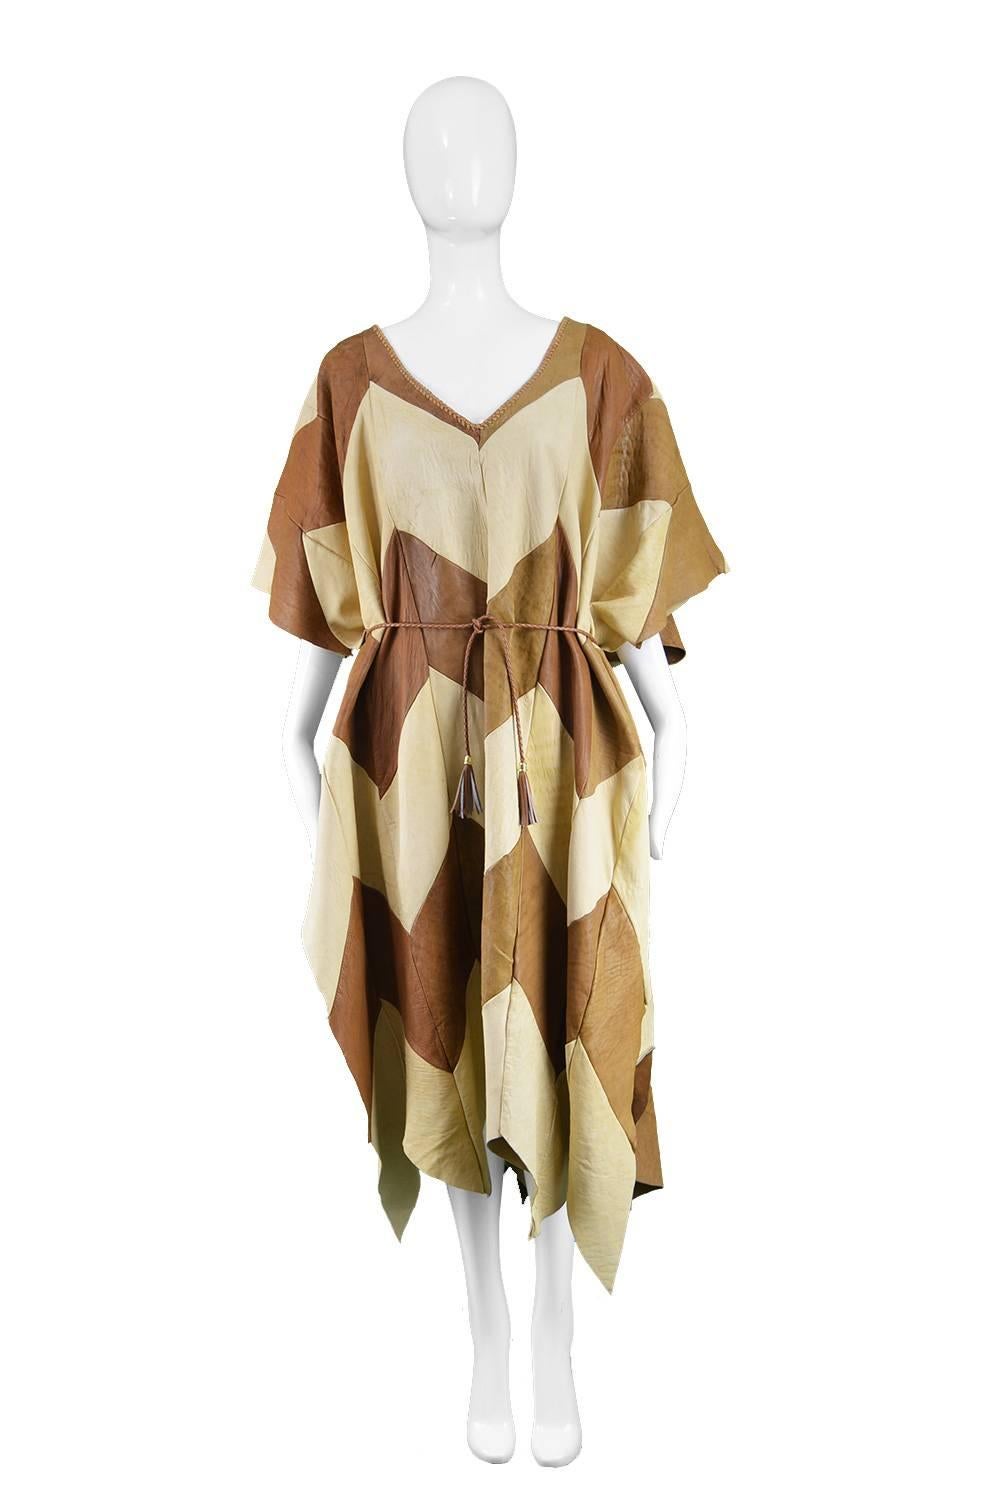 Vintage Cream & Brown Leather Patchwork Maxi Mexican Poncho Cape, 1970s

Size: One size fits all. Slips on over the head and is open at the sides. Belt fits Small to Large.
Bust - Free
Waist - Free
Hips - Free
Length (Shoulder to Hem) - 49” /